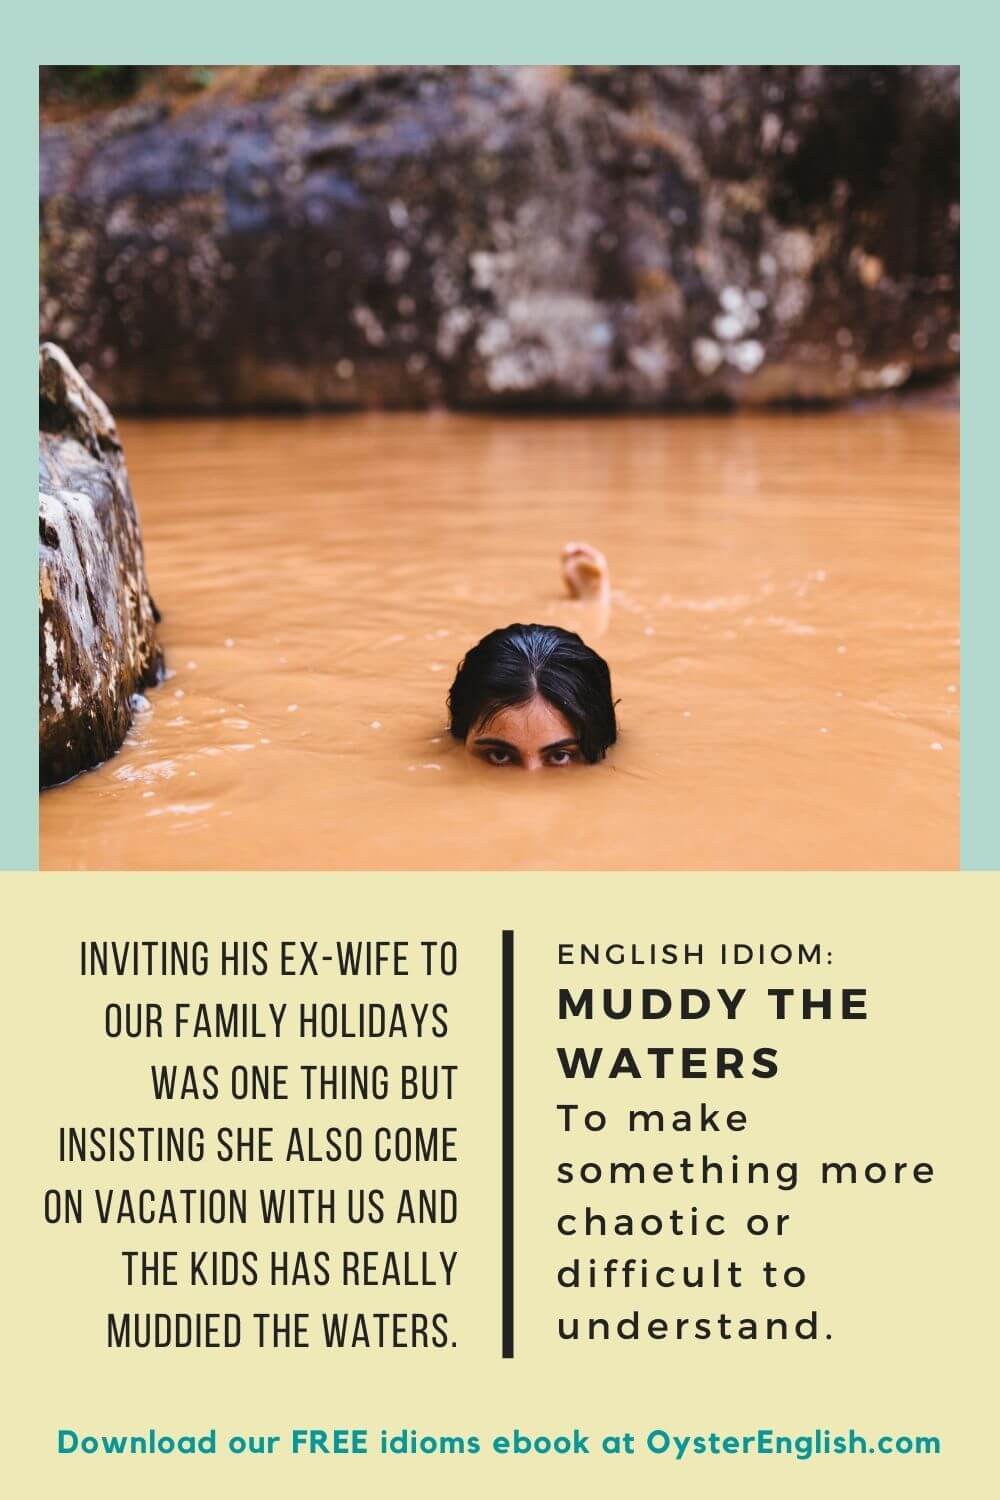 Woman floating in a muddy stream of water: Inviting his ex-wife to our family holidays was one thing but insisting she also come on vacation with us and the kids has really muddied the waters.